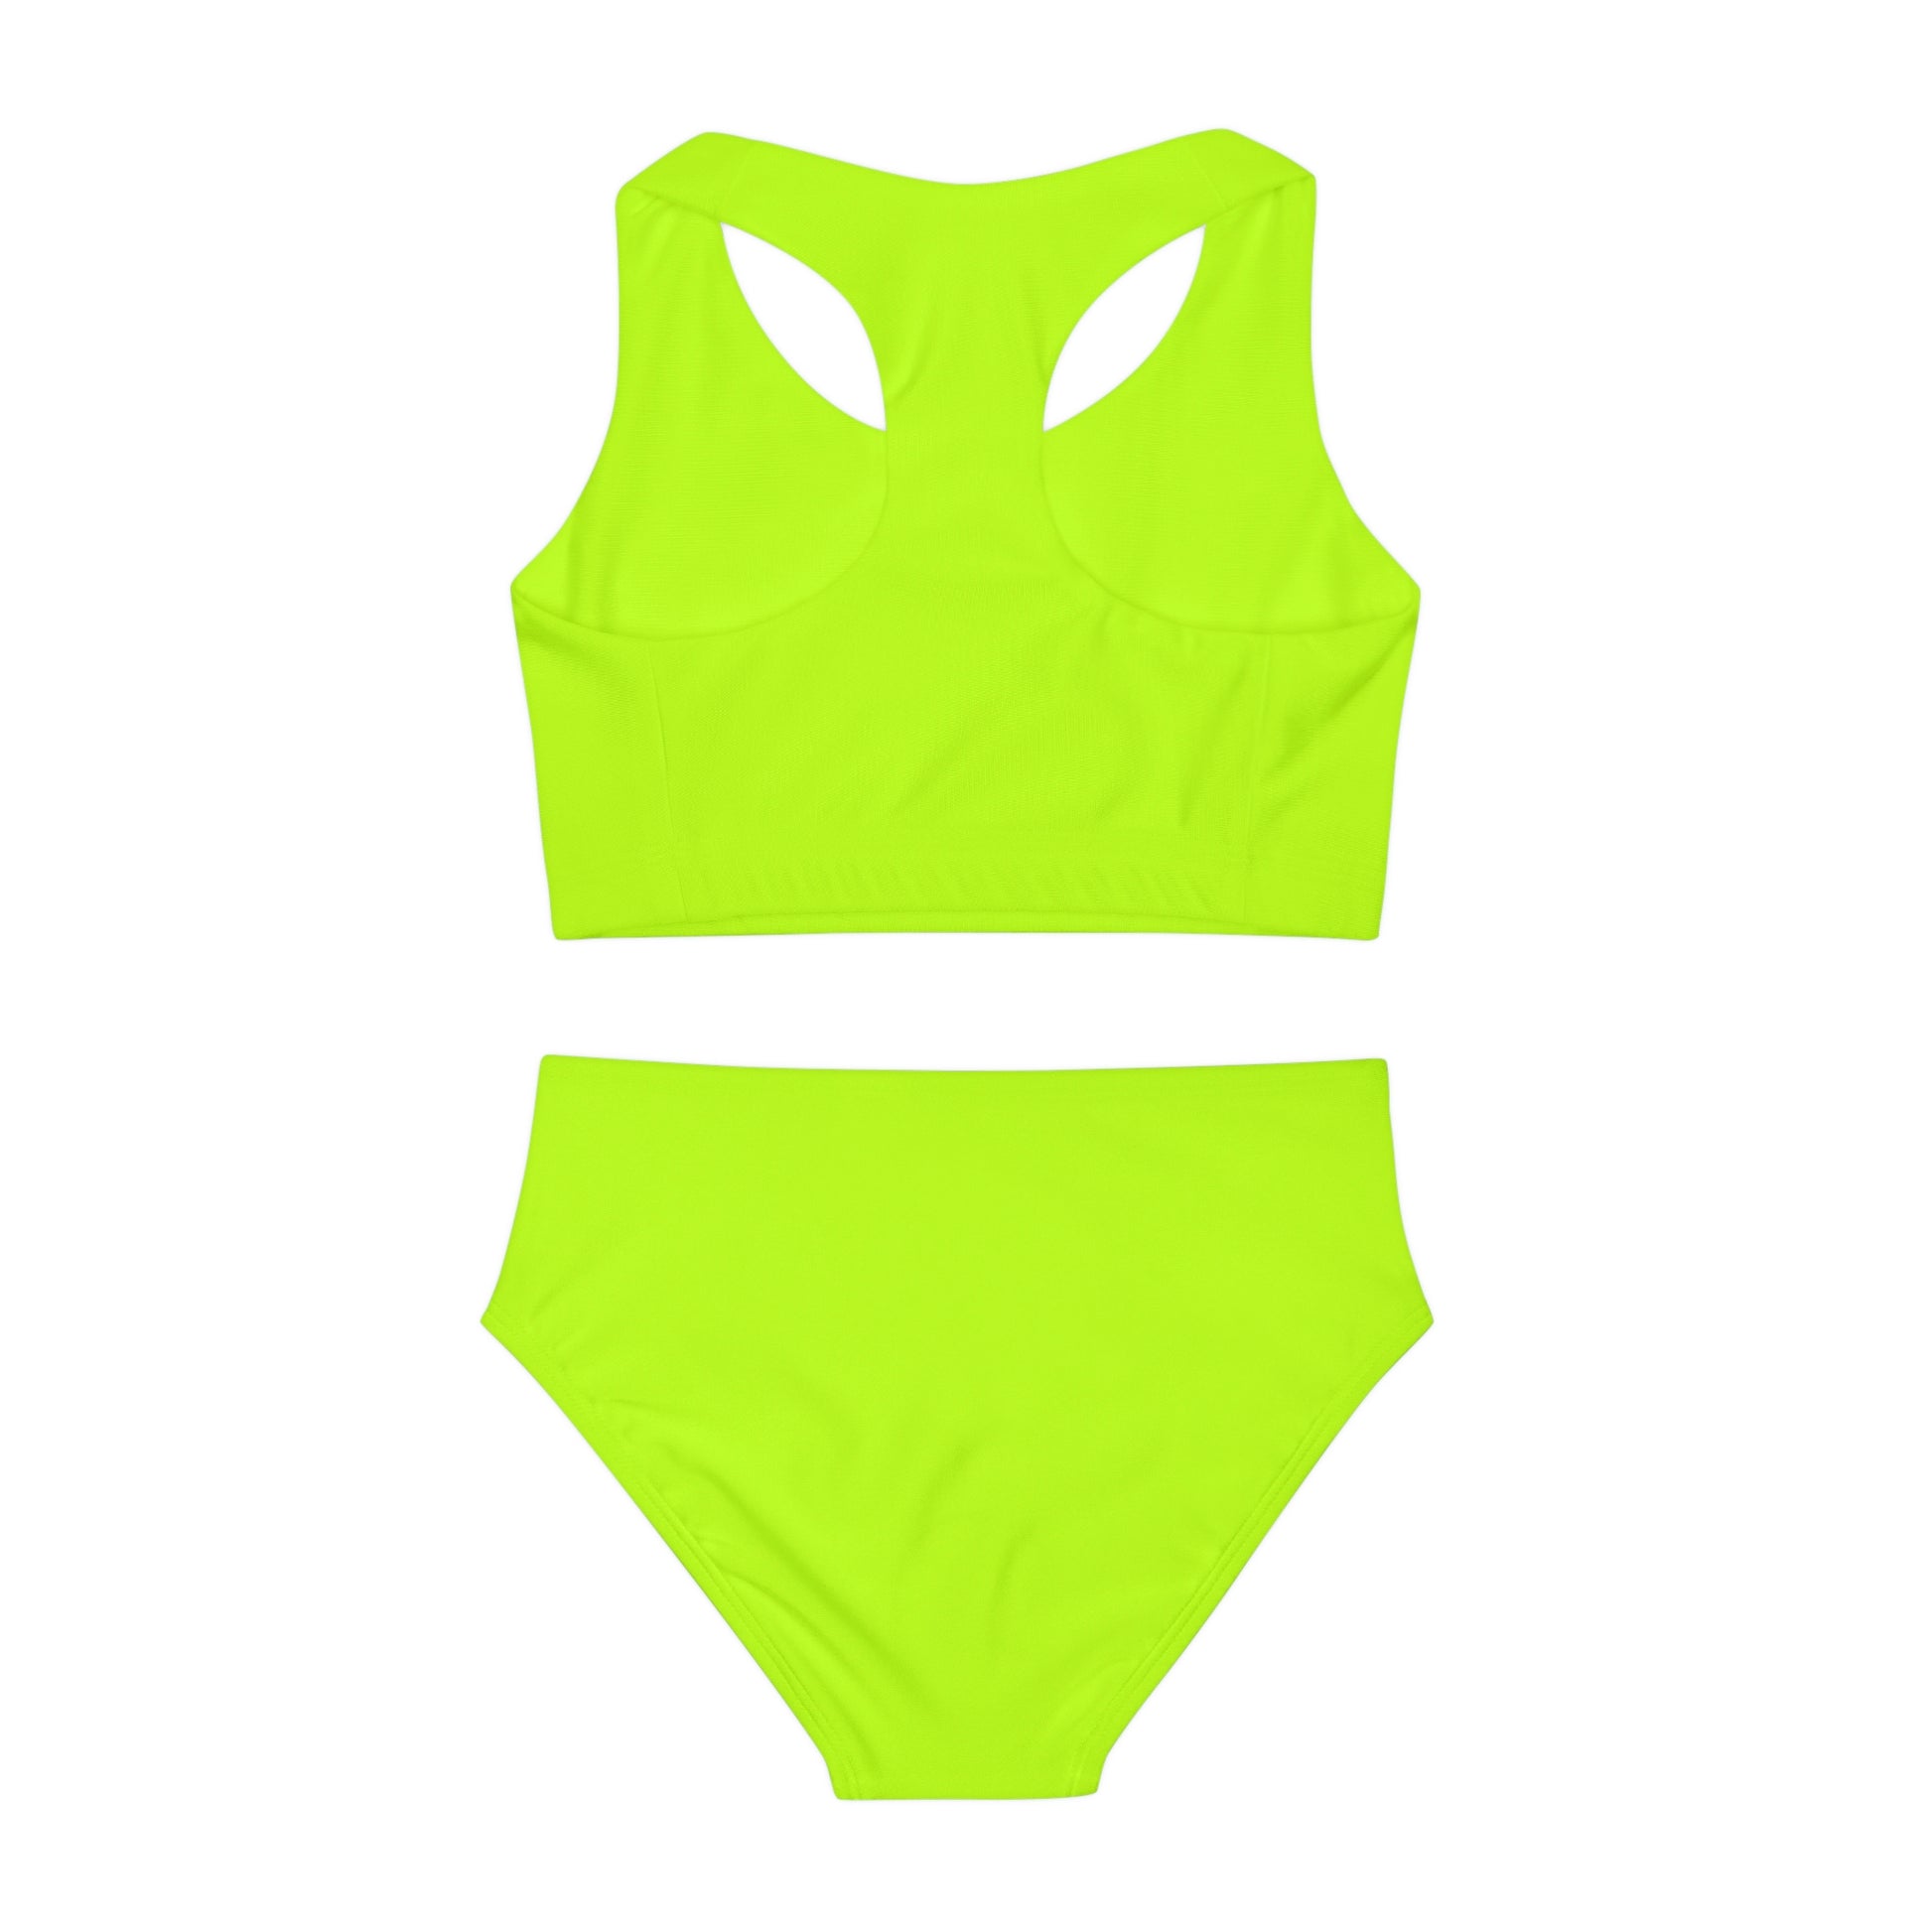 Two Piece Swimming Suits Women, Swimming Suits Women 2 Piece